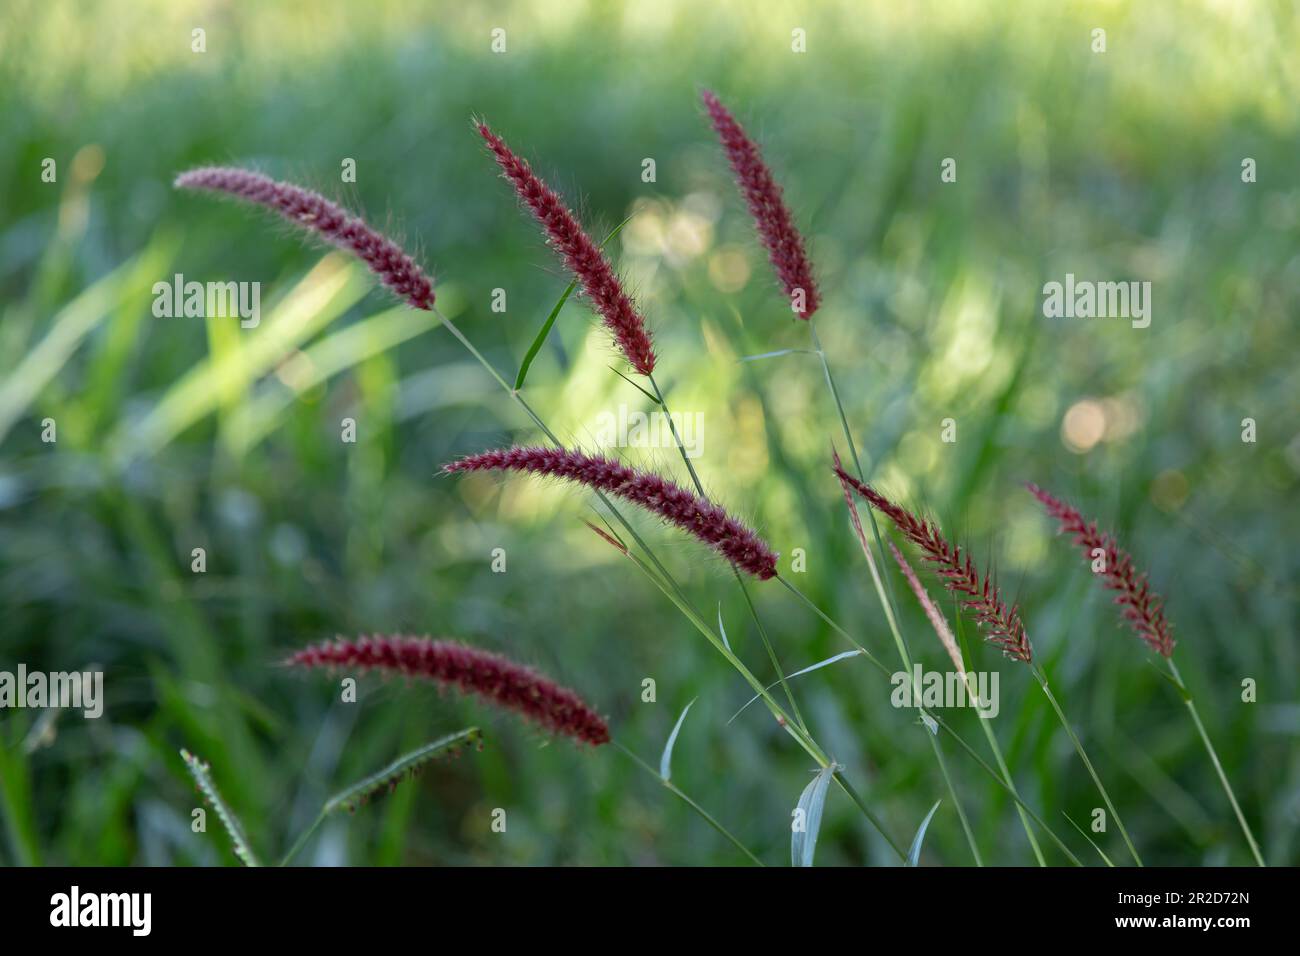 Tropical wild grass floral spike in selective focus. Relaxing Stock Photo